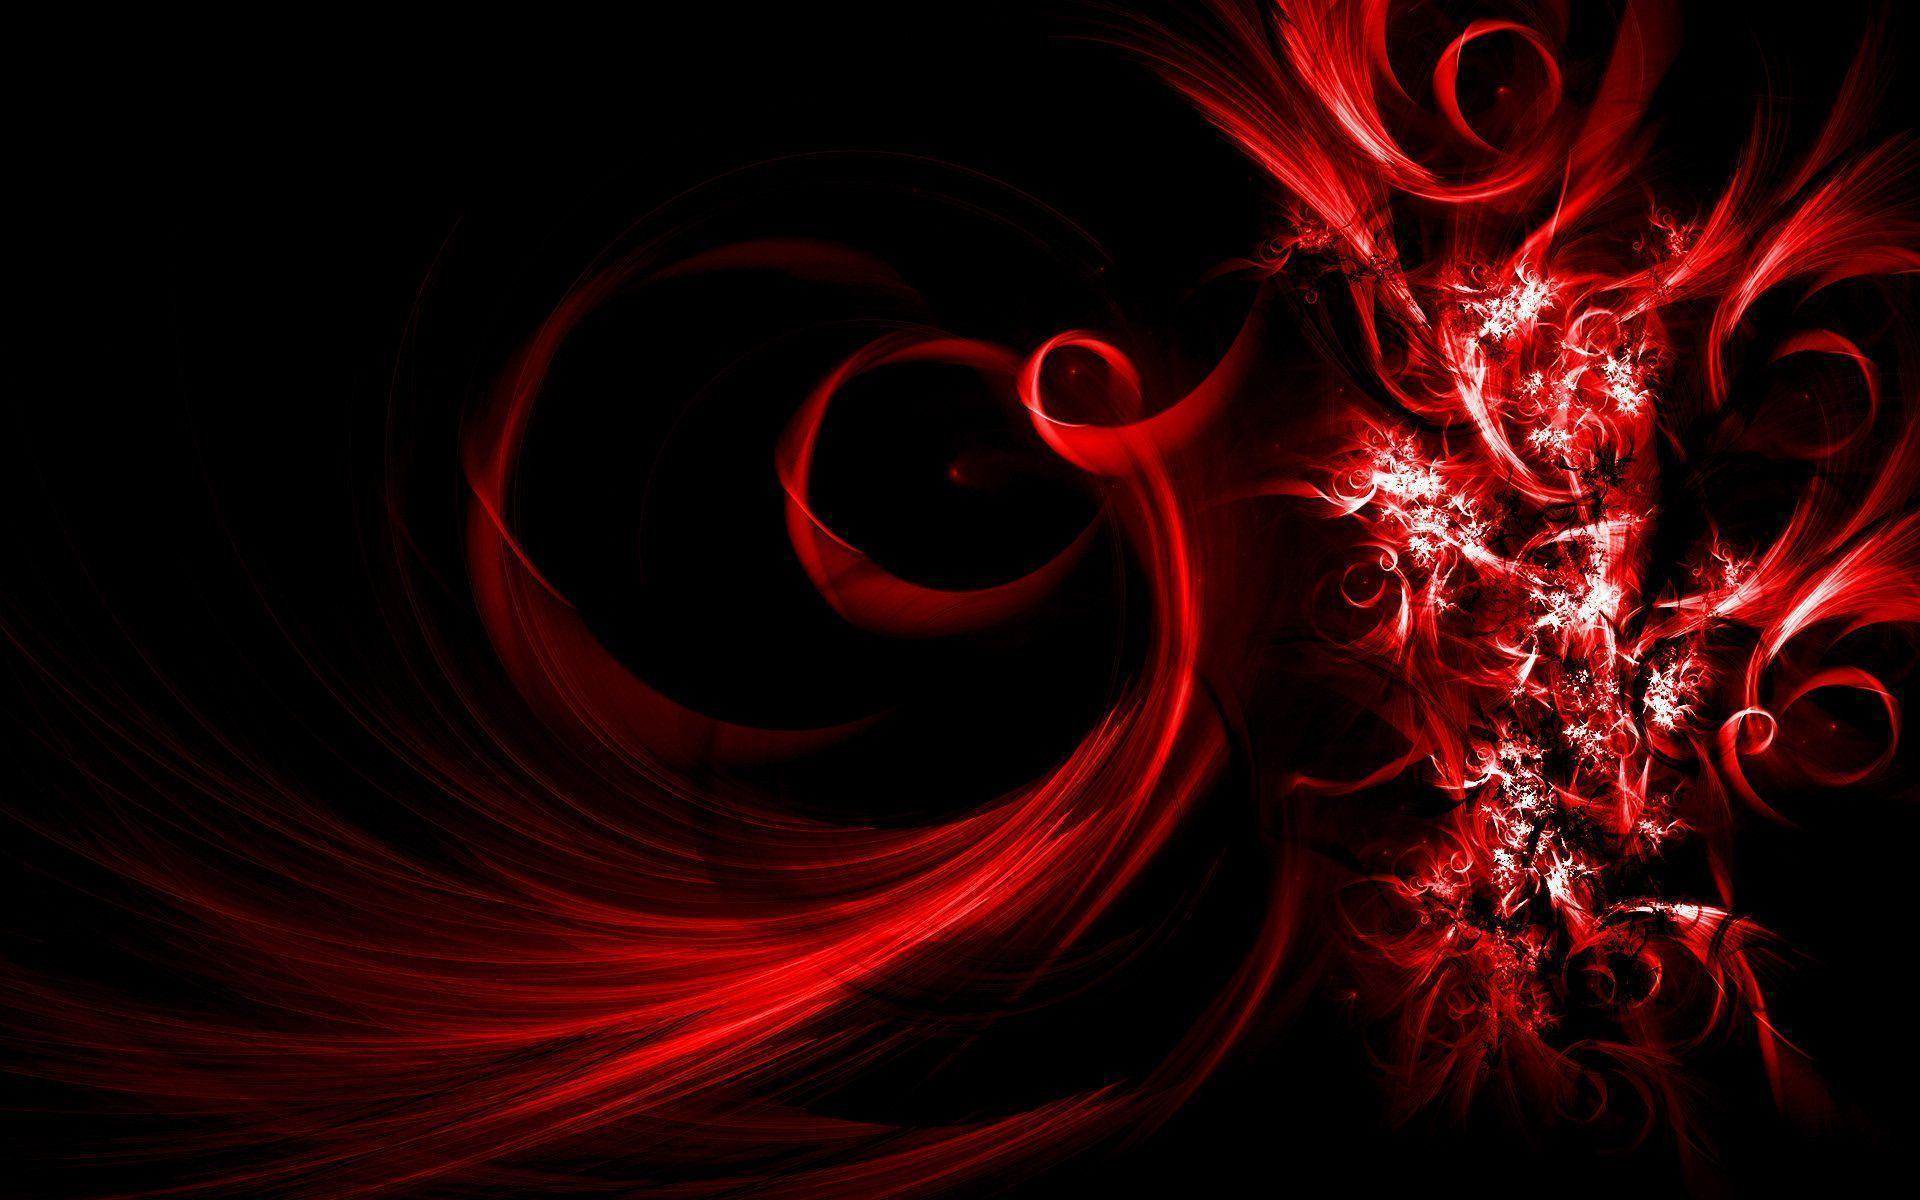 Hd Abstract Wallpaper Red Image 6 HD Wallpaper. Hdimges